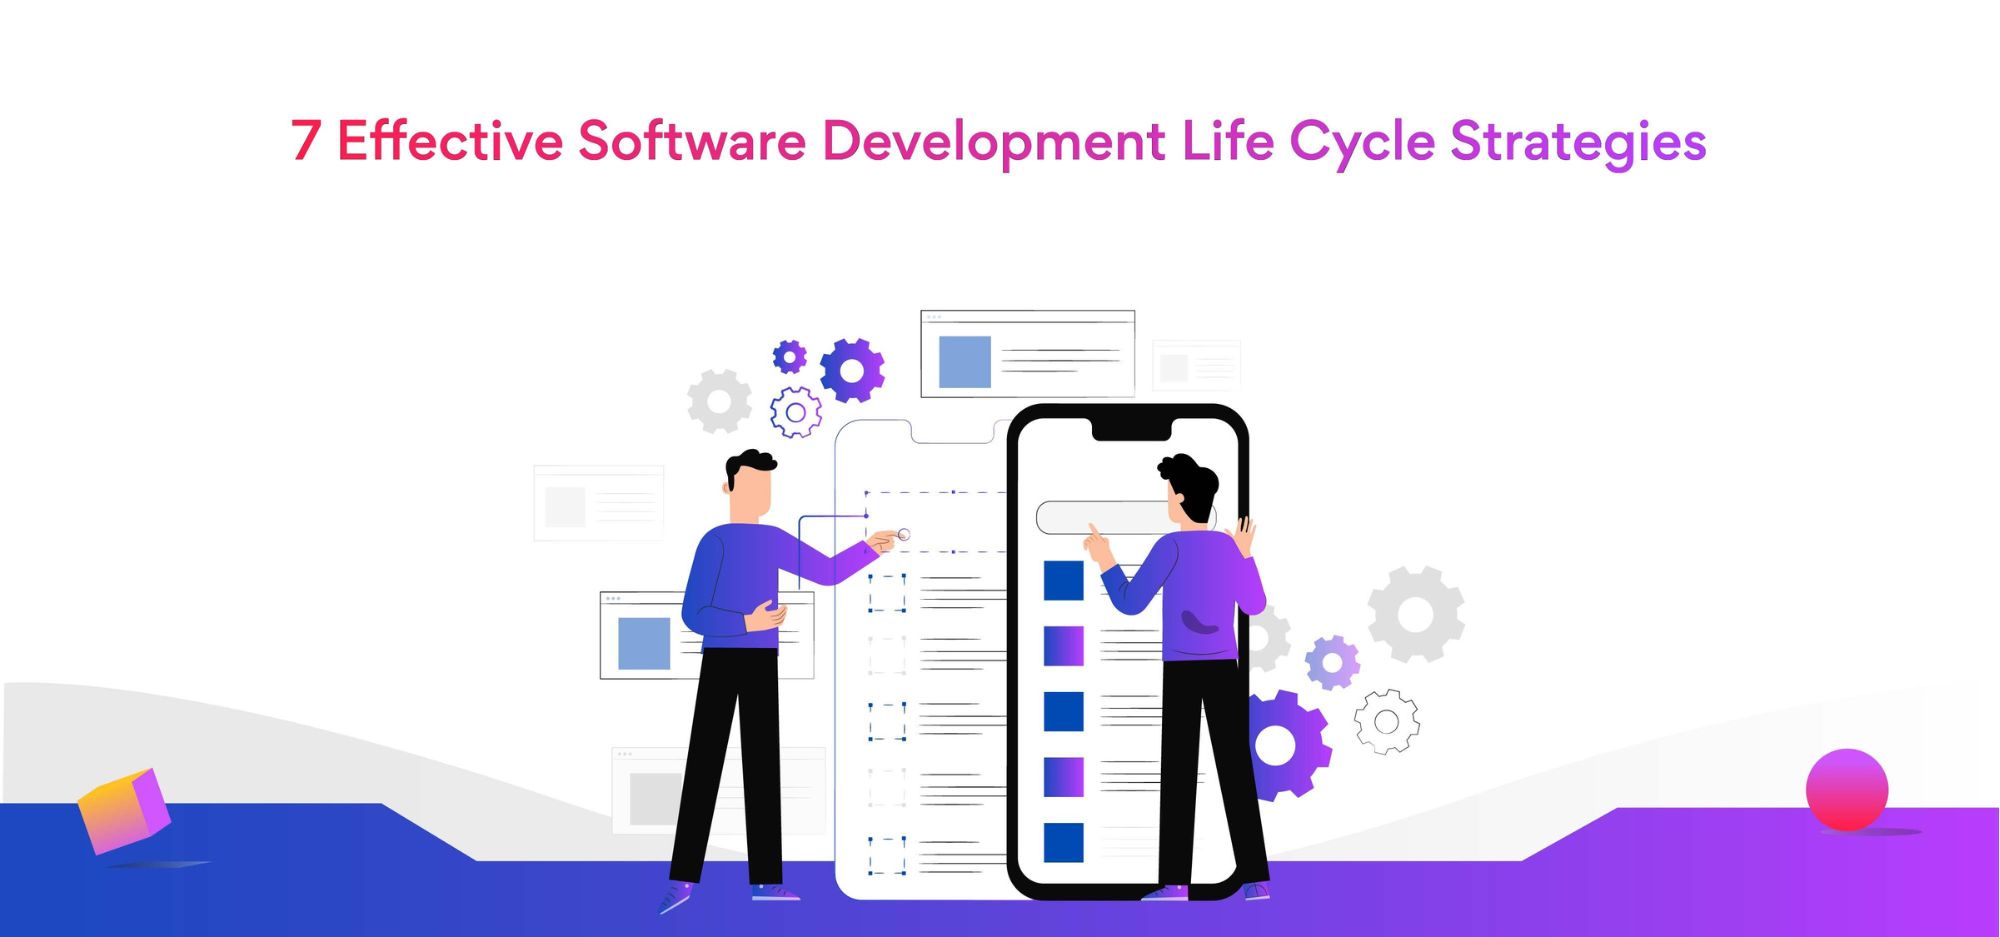 7 Effective Software Development Life Cycle Strategies